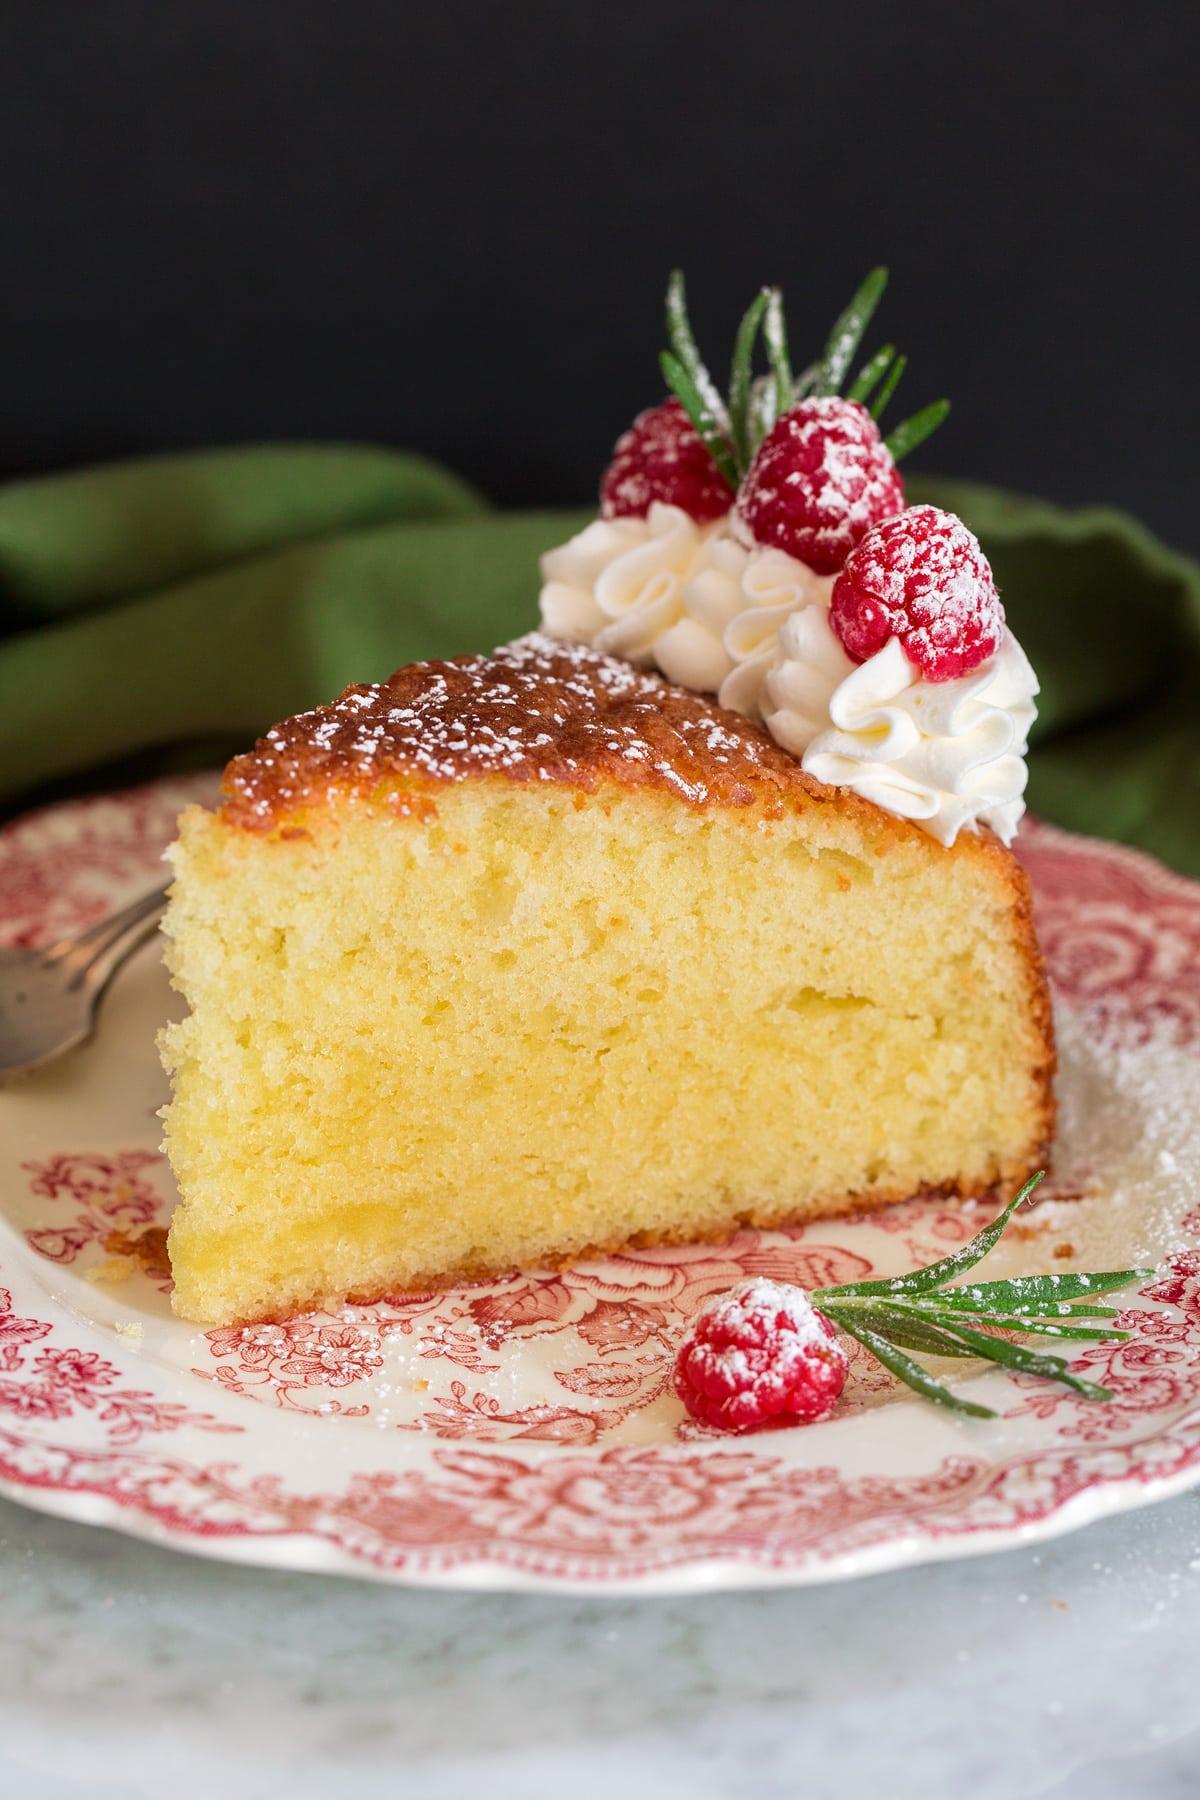 Photo of slice of olive oil cake decorated with whipped cream, raspberries and rosemary. Shown on a decorative red plate.